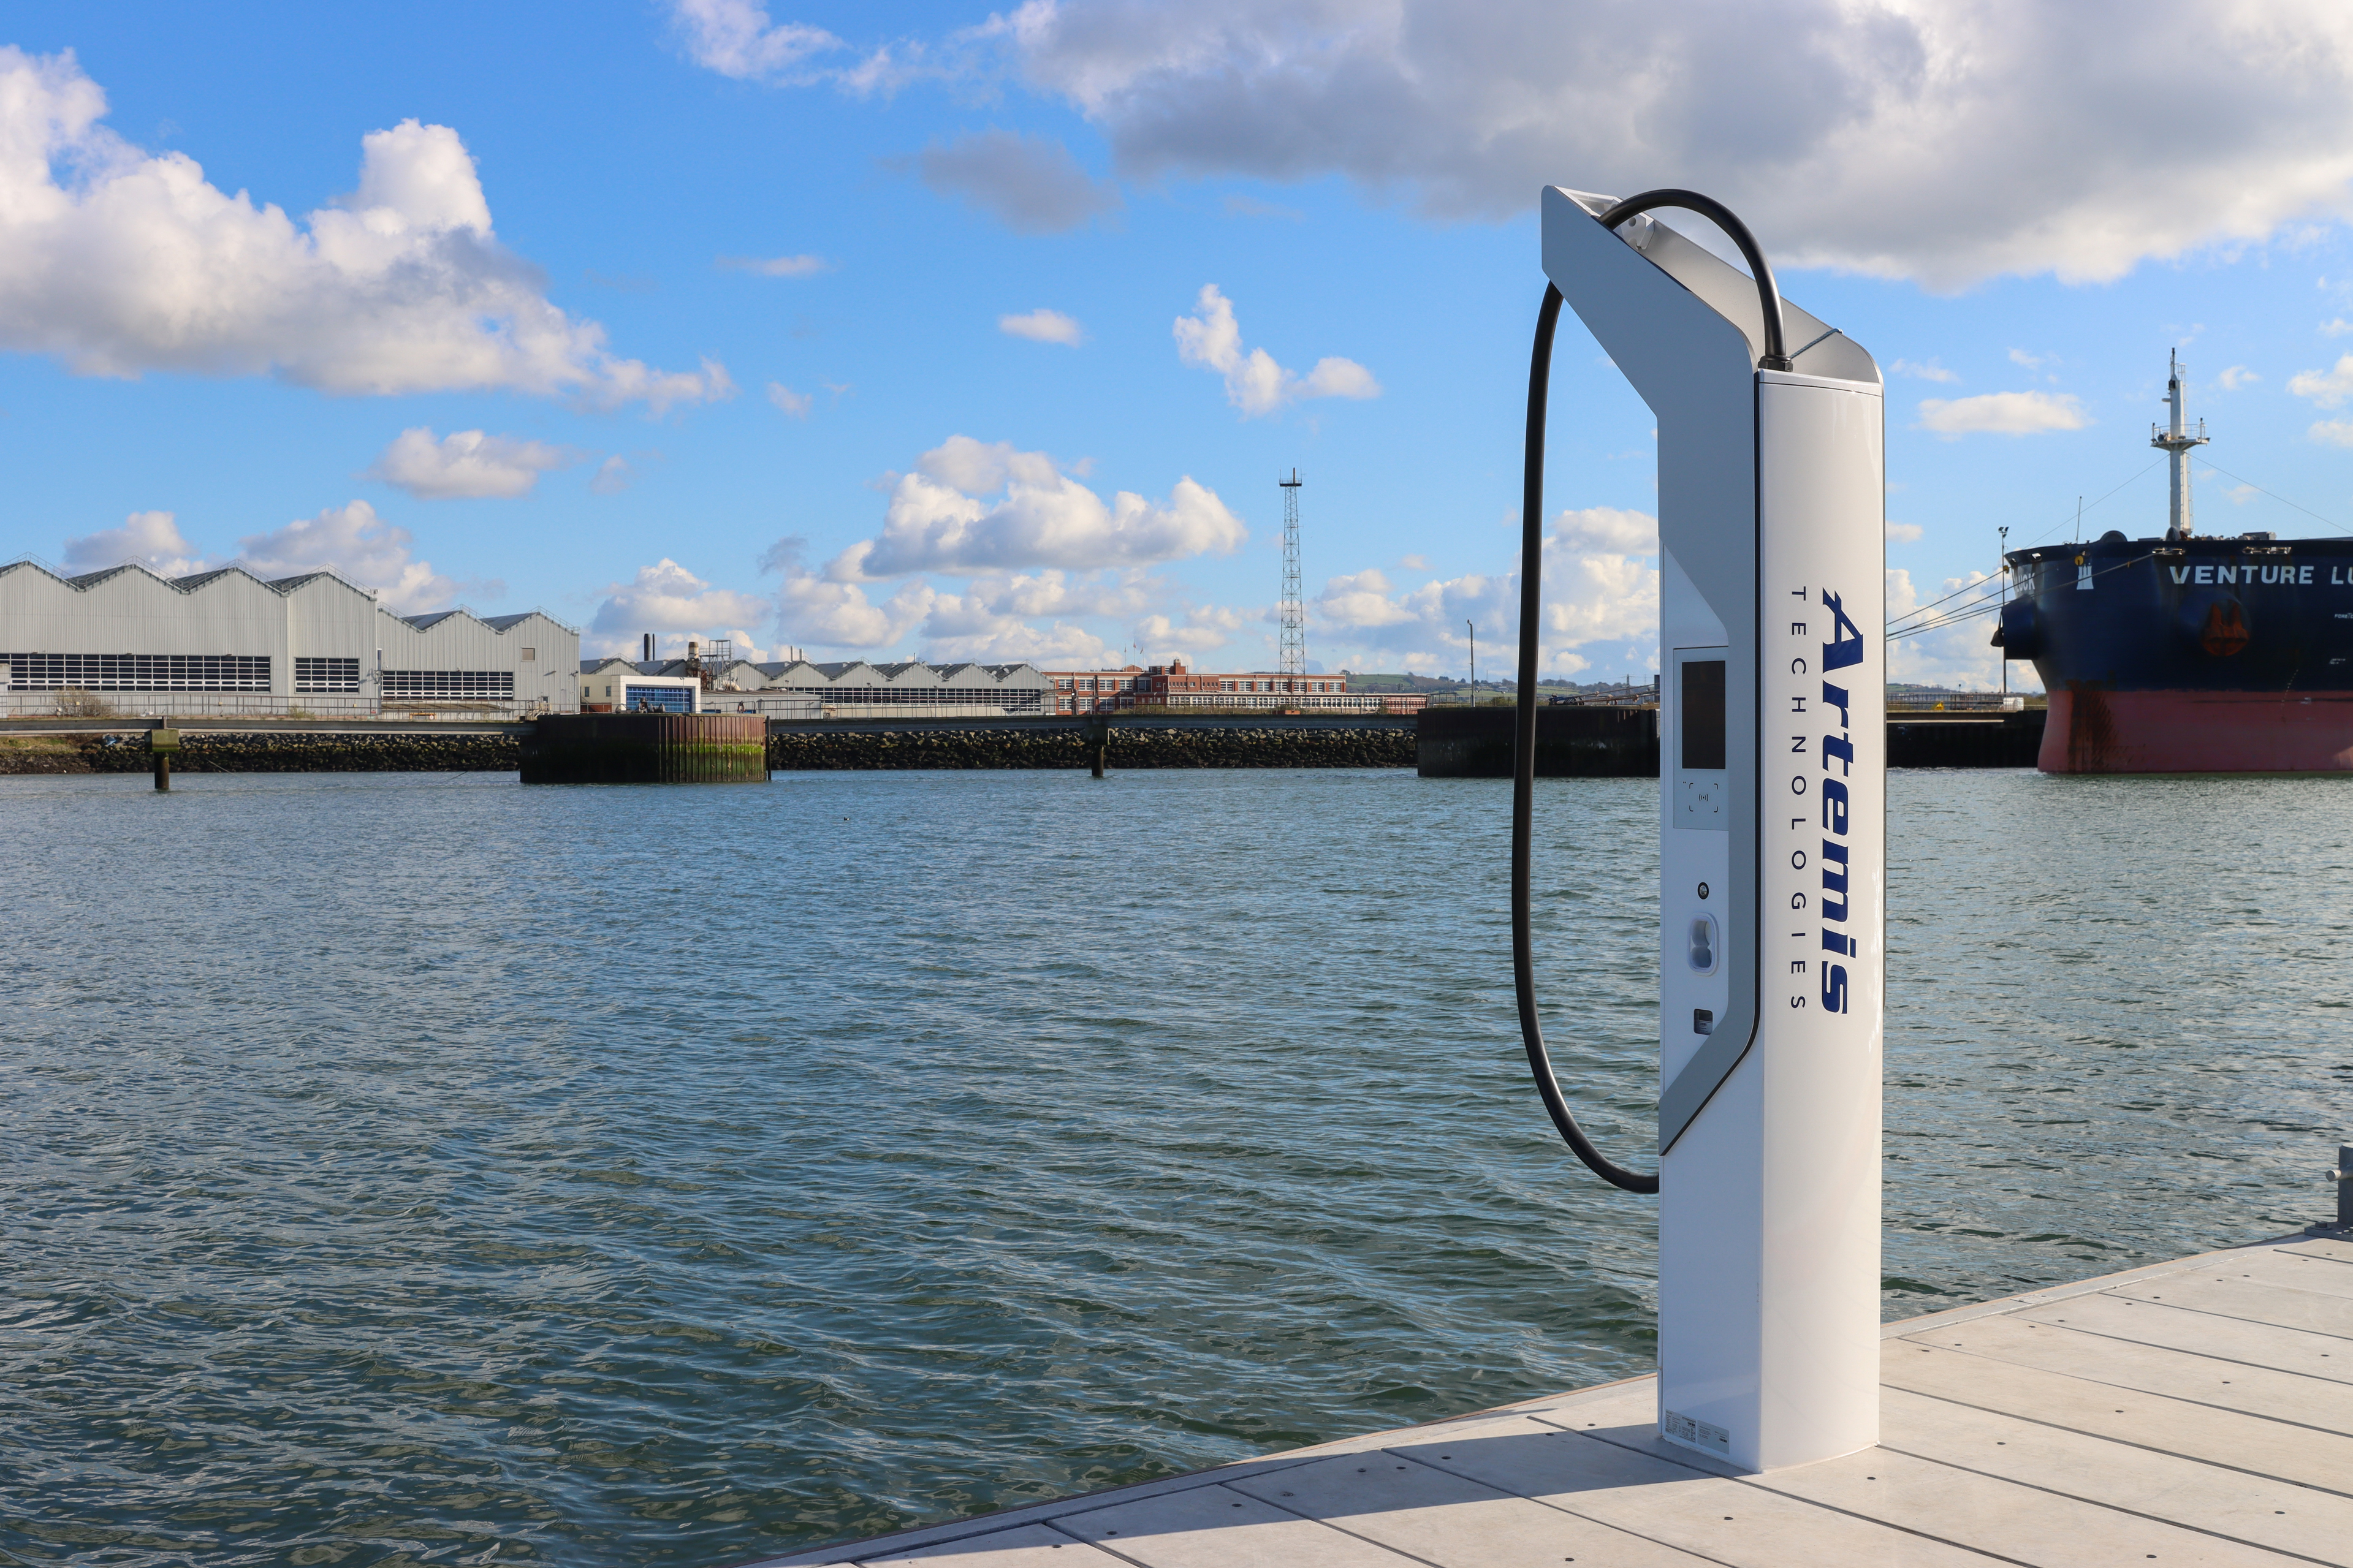 Shore side charger with Artemis Technologies logo on a pontoon in Belfast Harbour